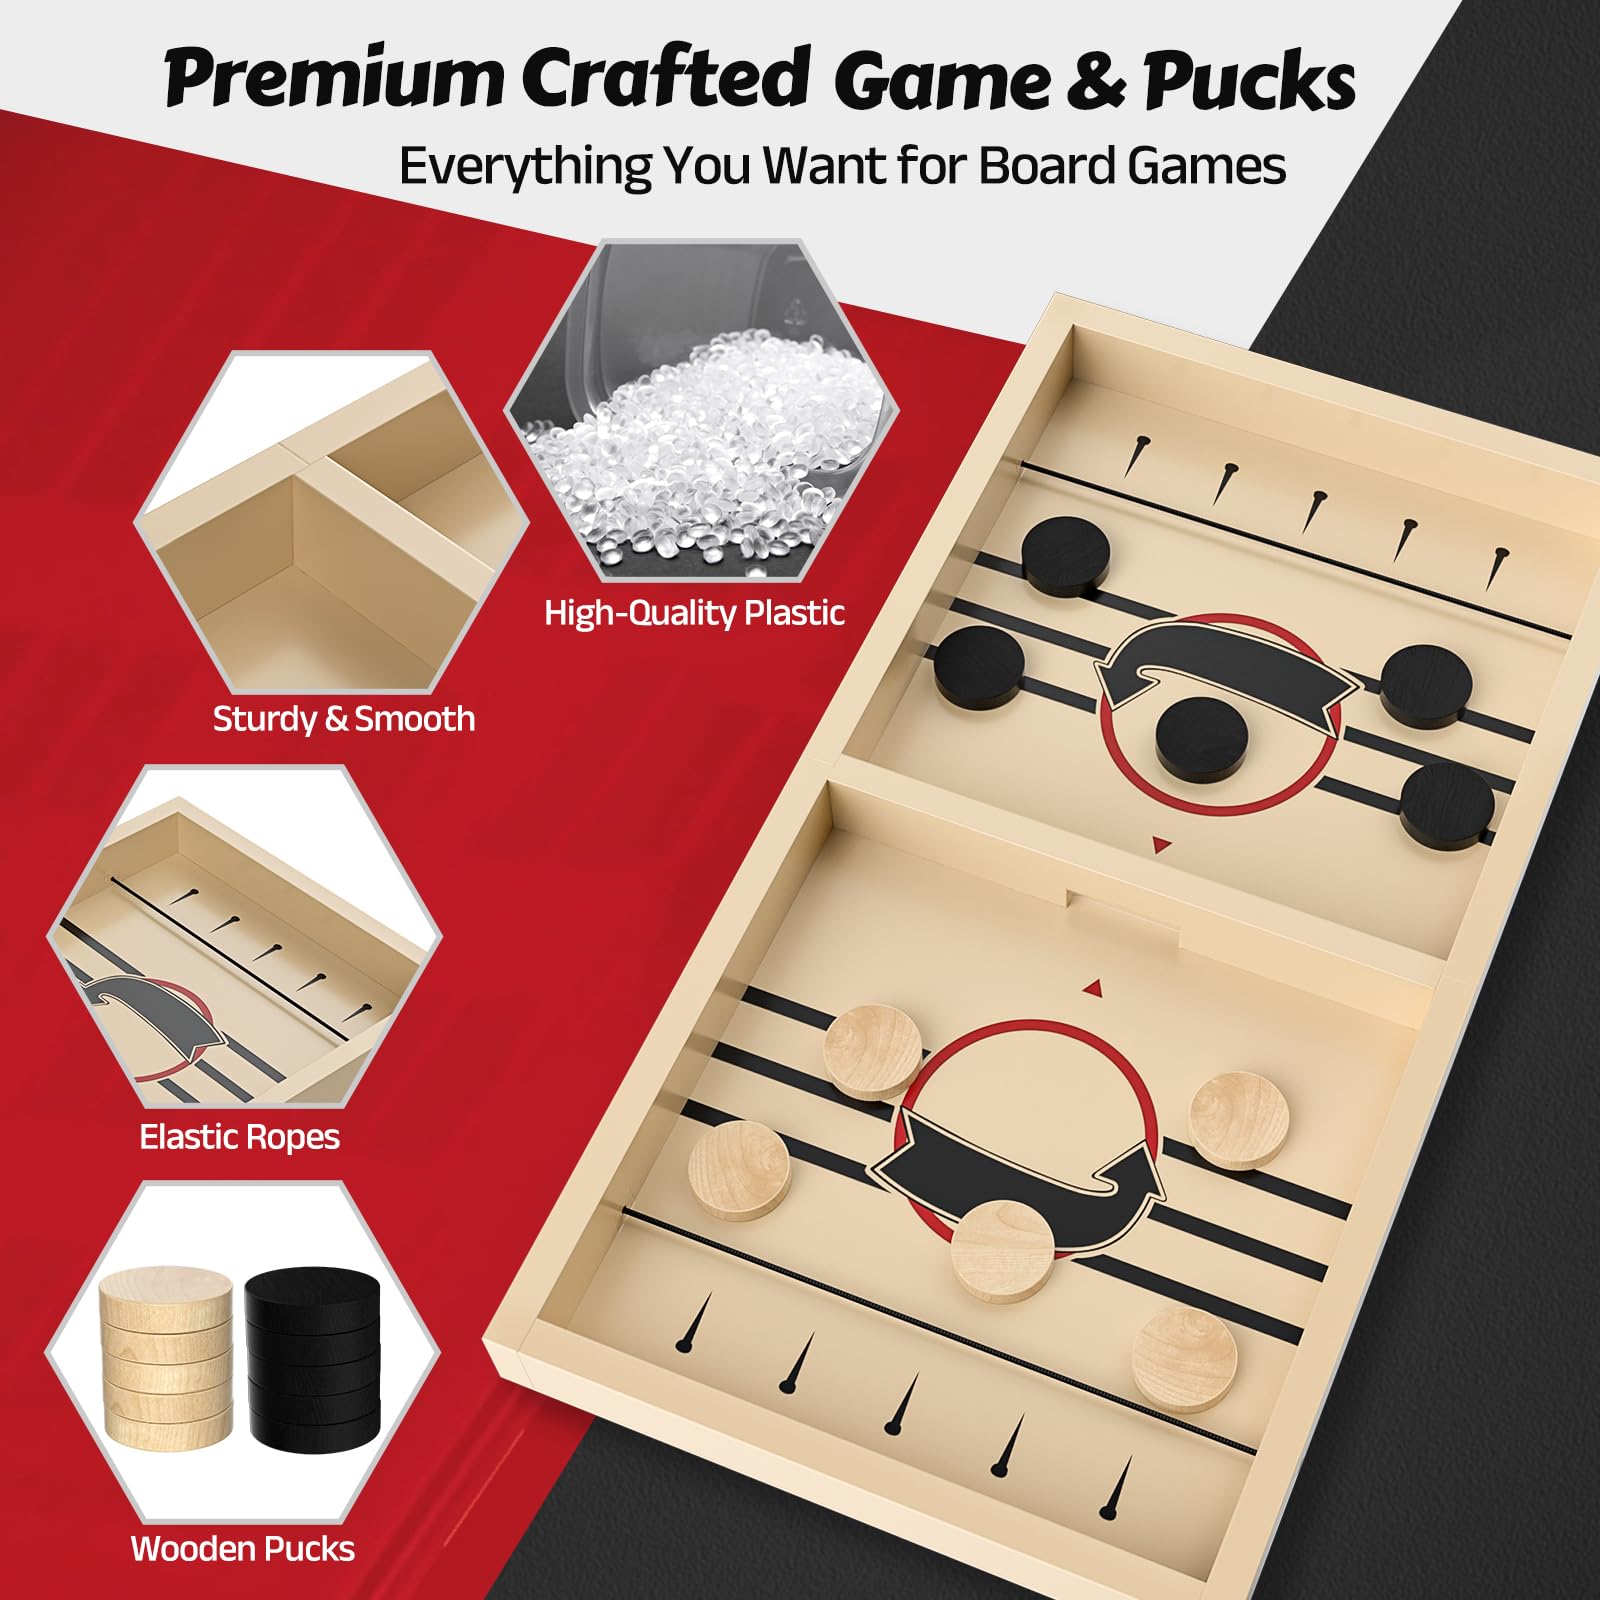 Large Fast Sling Puck Game - Fast Paced Plastic Super Winner Sling Hockey Board Games & Rapid Slingshot Battle Table - Ideal for Family Nights, Parties & Competitive Fun for Adults and Kids